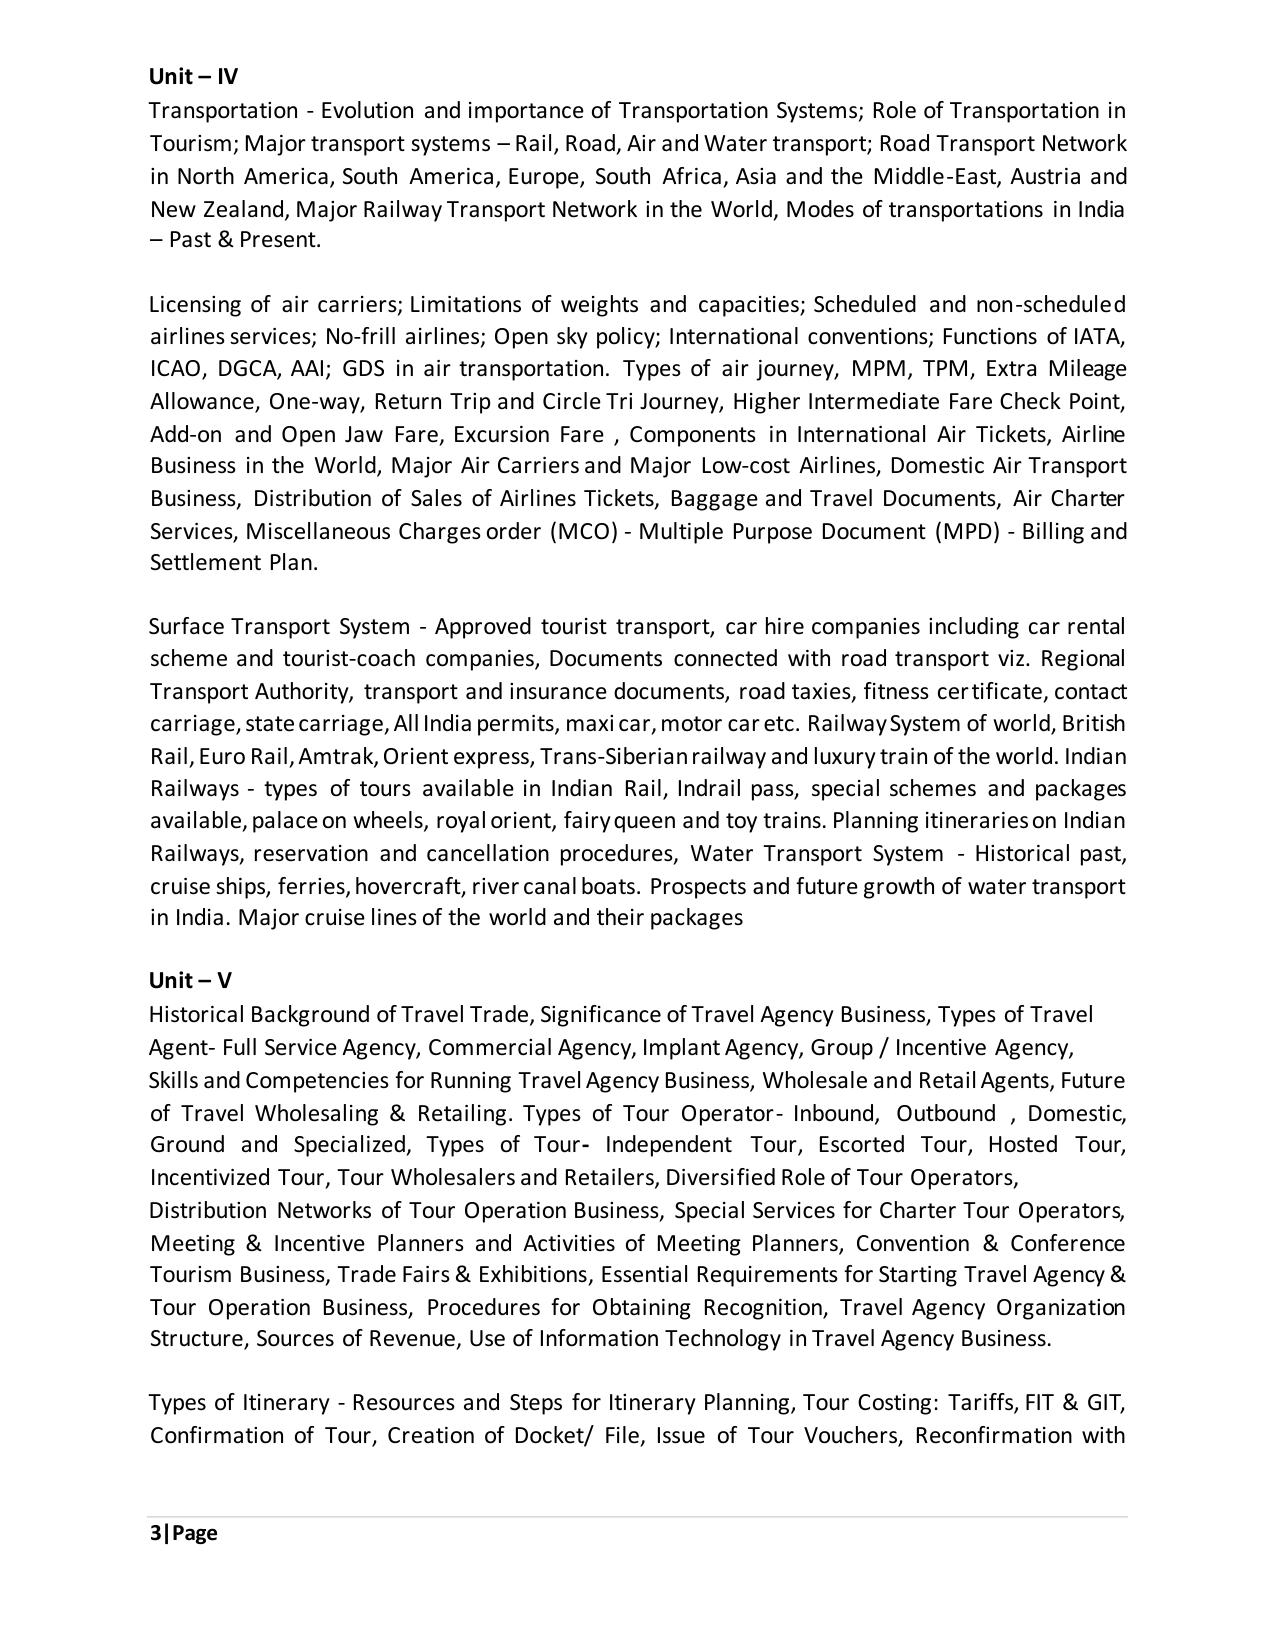 TNSET Syllabus - Tourism Administration and Management - Page 3